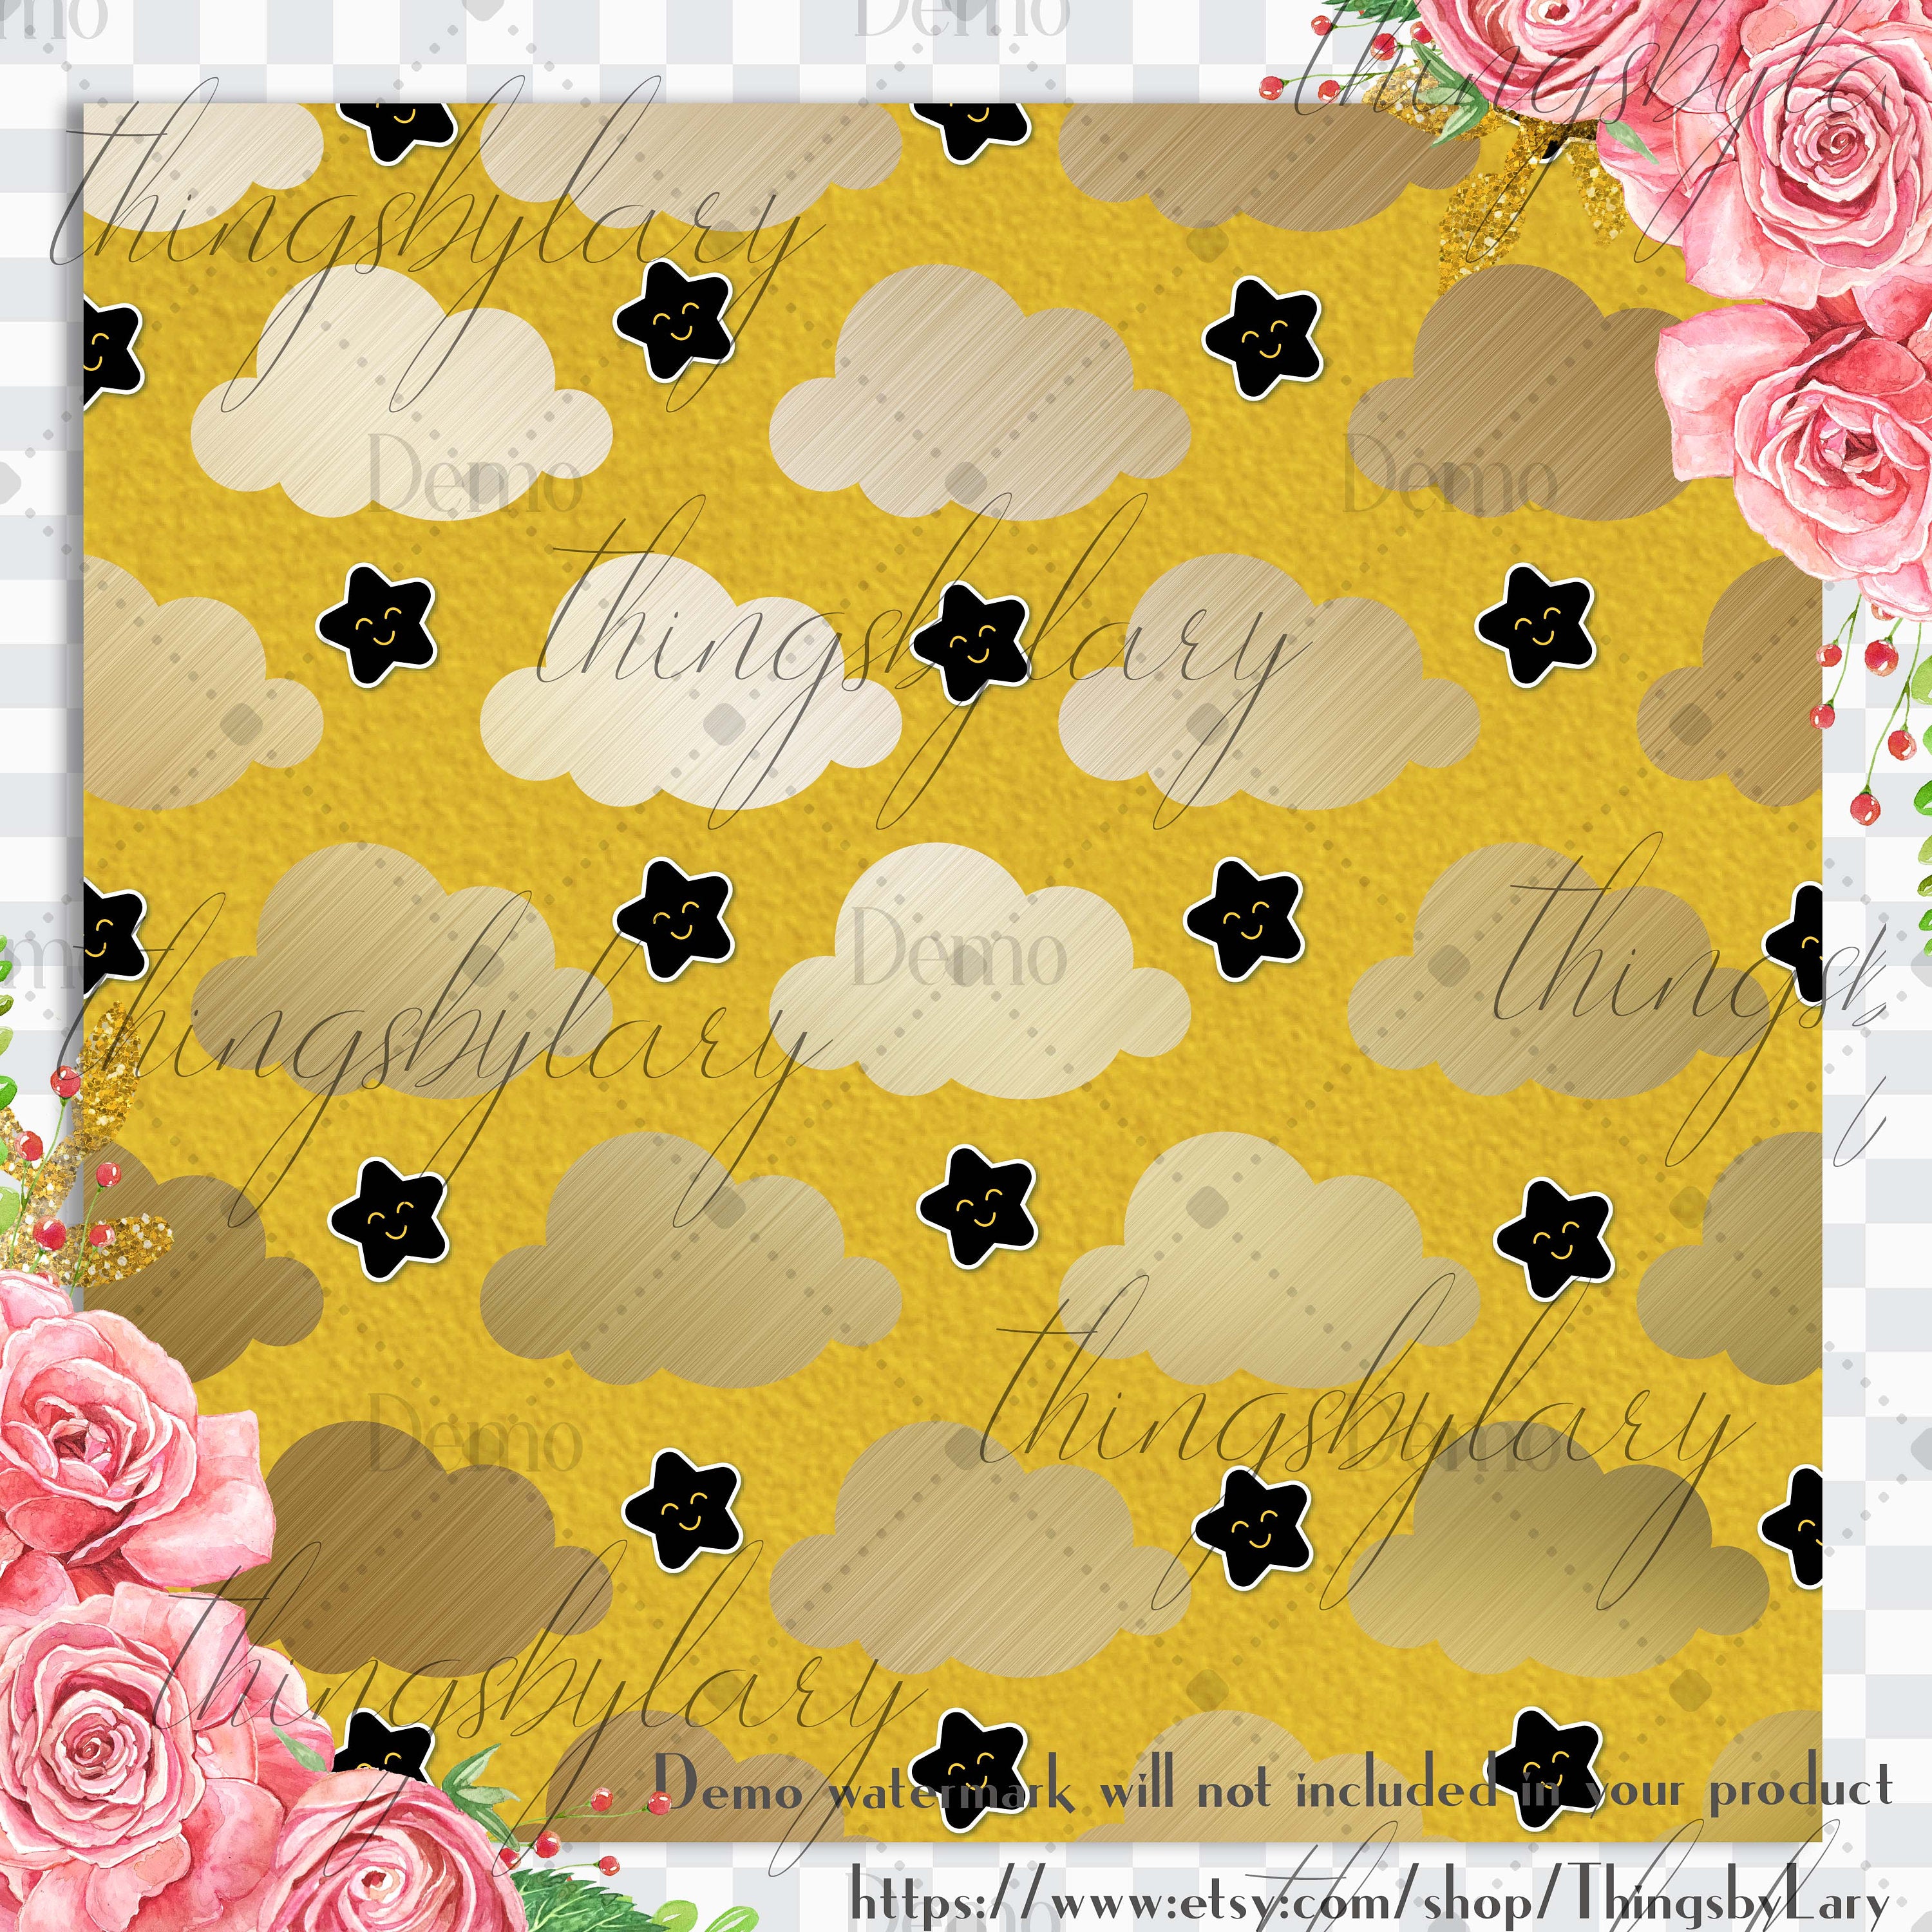 12 Black & Gold Baby Shower Digital Papers in 12 inch 300 Dpi Instant Download, Scrapbook Papers, Kid Digital Papers, Commercial Use